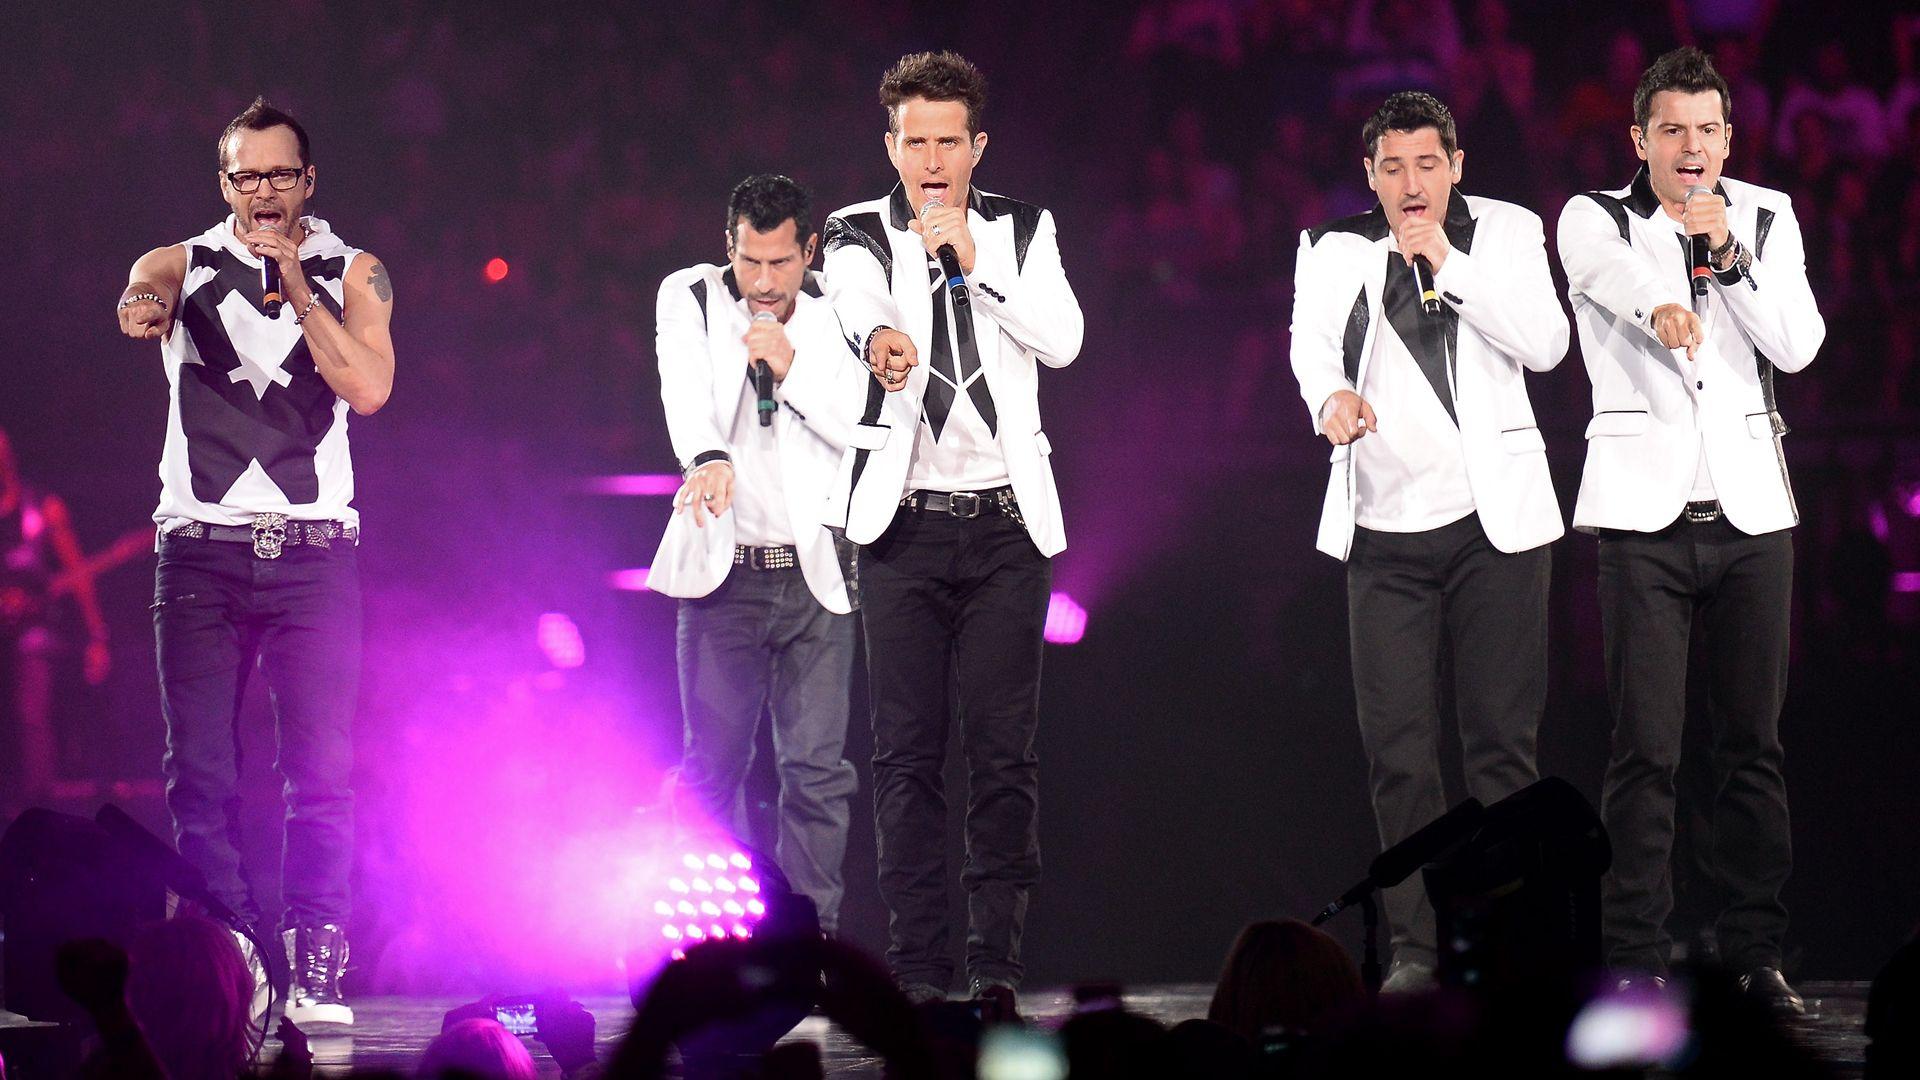 New Kids on the Block will 'Rock This Boat' in new reality show